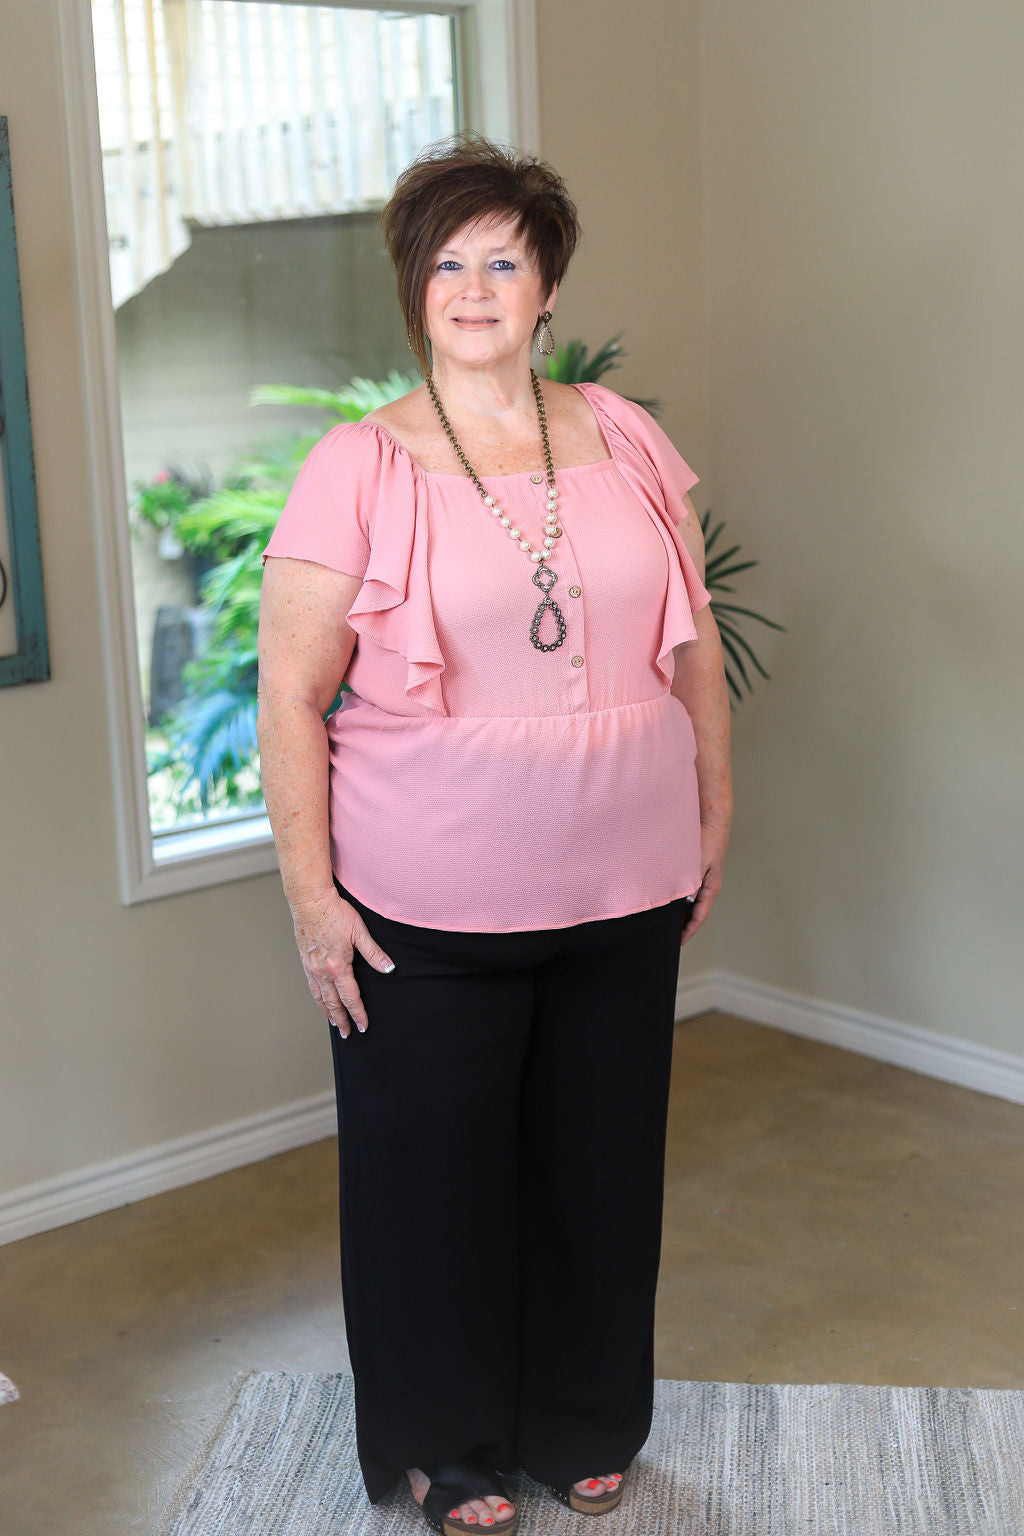 Last Chance Size 2XL & 3XL | Plus Size | Resounding Success Peplum Top with Button Detail in Light Pink - Giddy Up Glamour Boutique